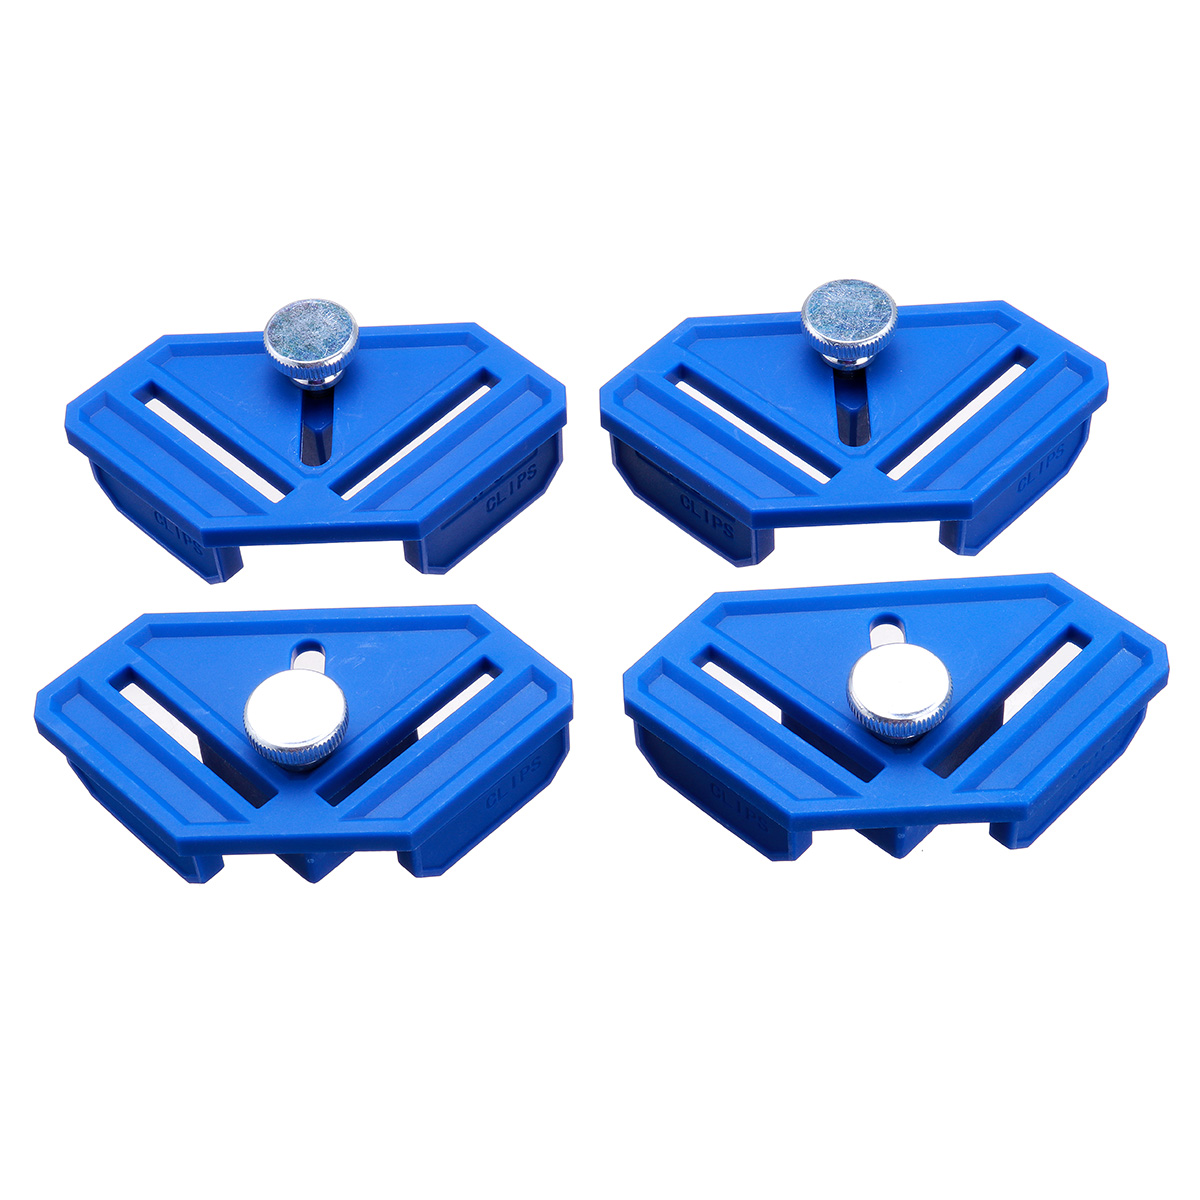 4pcs-Adjustable-Right-Angle-Positioning-Clamp-767642mm-Woodworking-Corner-Clamp-Right-Clips-DIY-Fixt-1889370-9